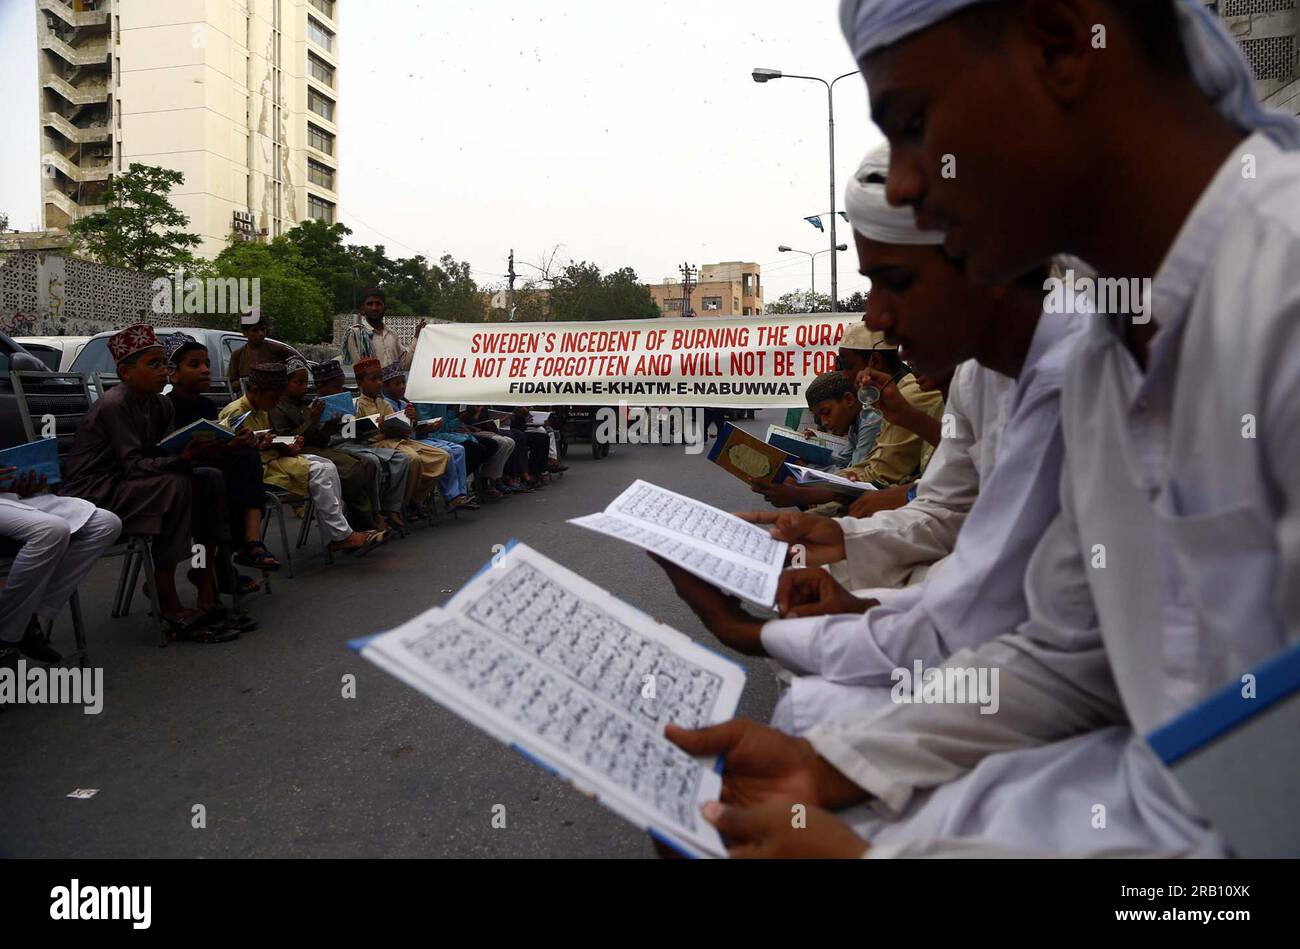 Hyderabad, Pakistan, July 6, 2023. Members of Fidaiyan-e-Khatm-e-Nabuwwat are reciting Quran as they are holding protest demonstration against desecration of Holy Quran in Sweden, at Karachi press club on Thursday, July 6, 2023. Stock Photo